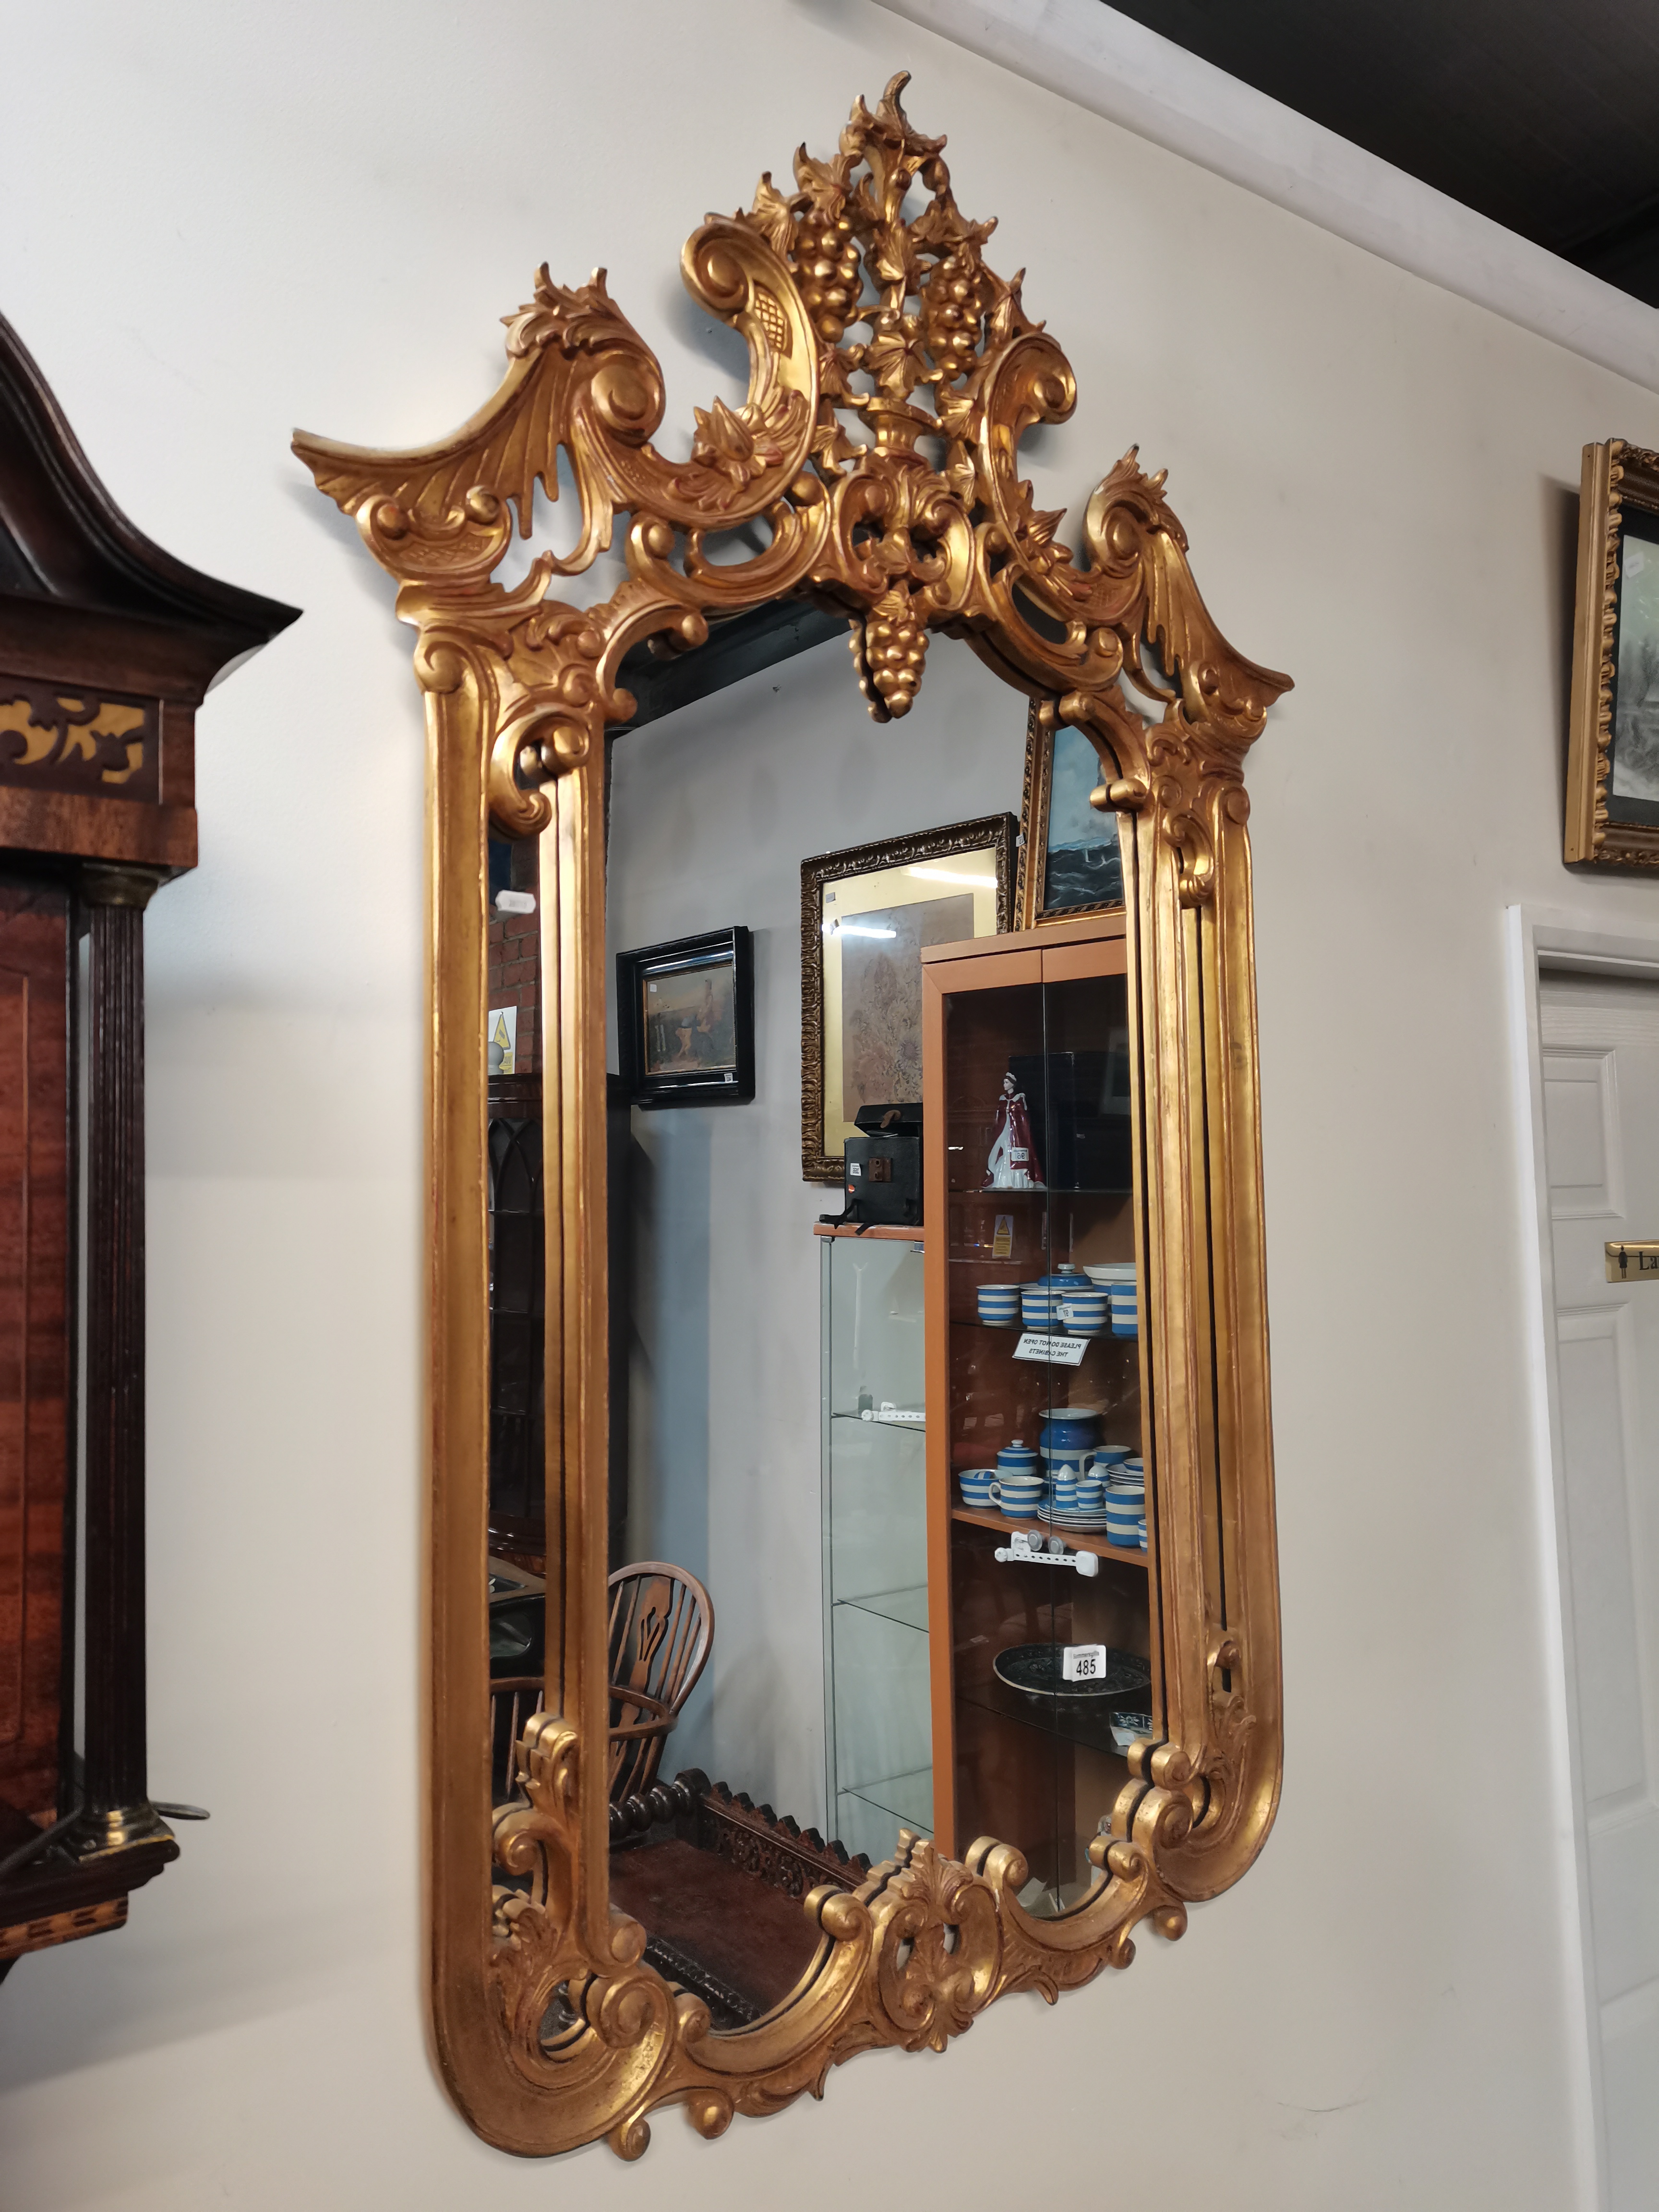 Chippendale style large gold framed mirror and marble top hall side table